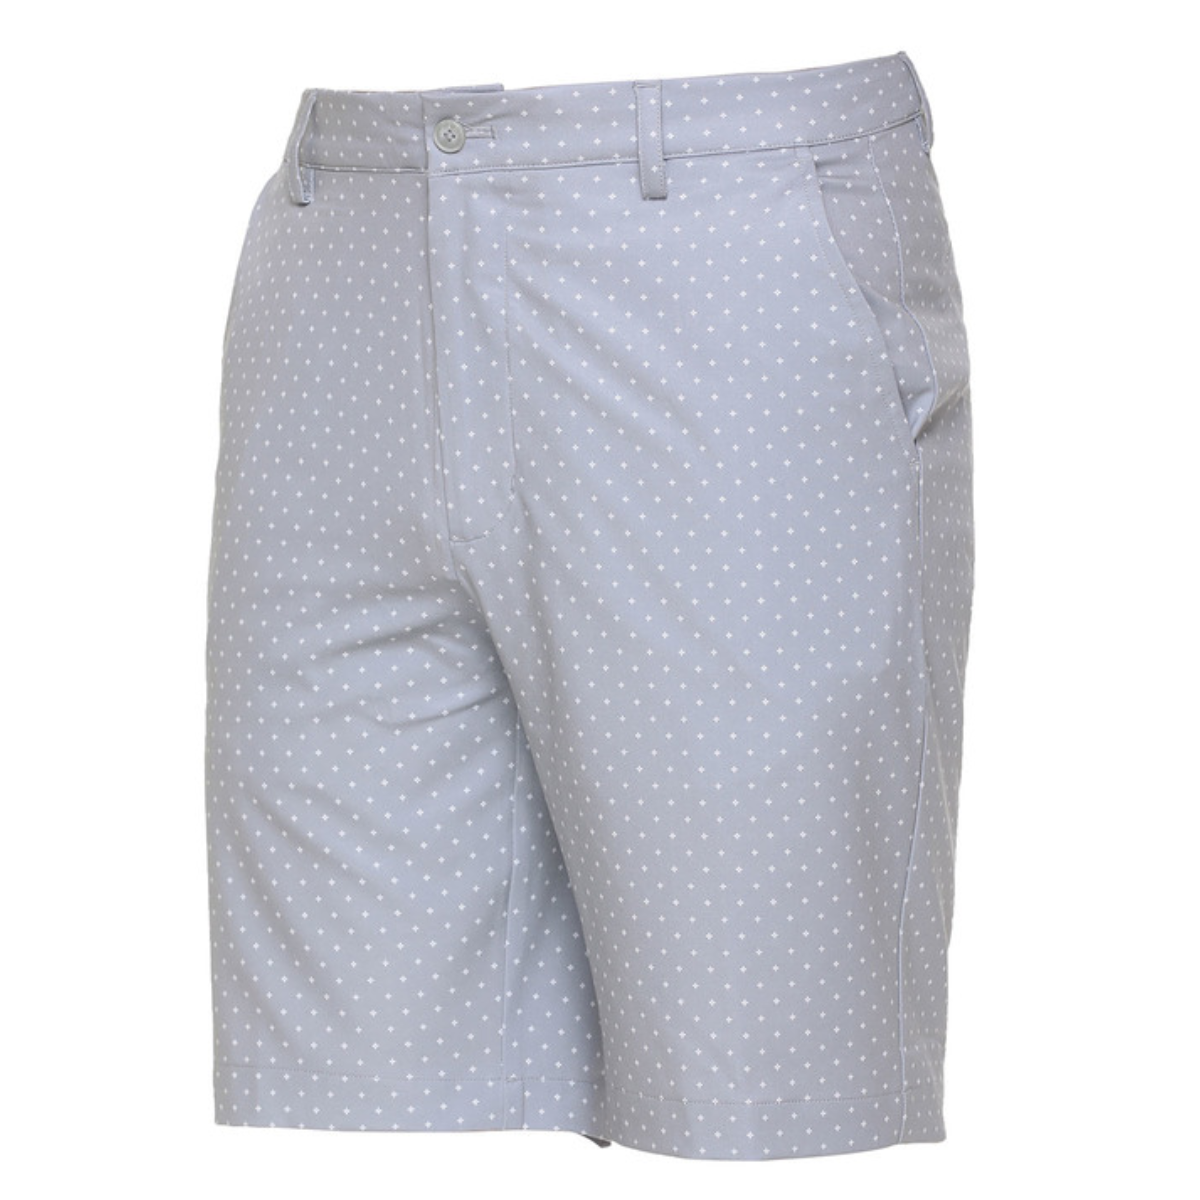 Greg Norman Printed Star Stretch Short (US Size)